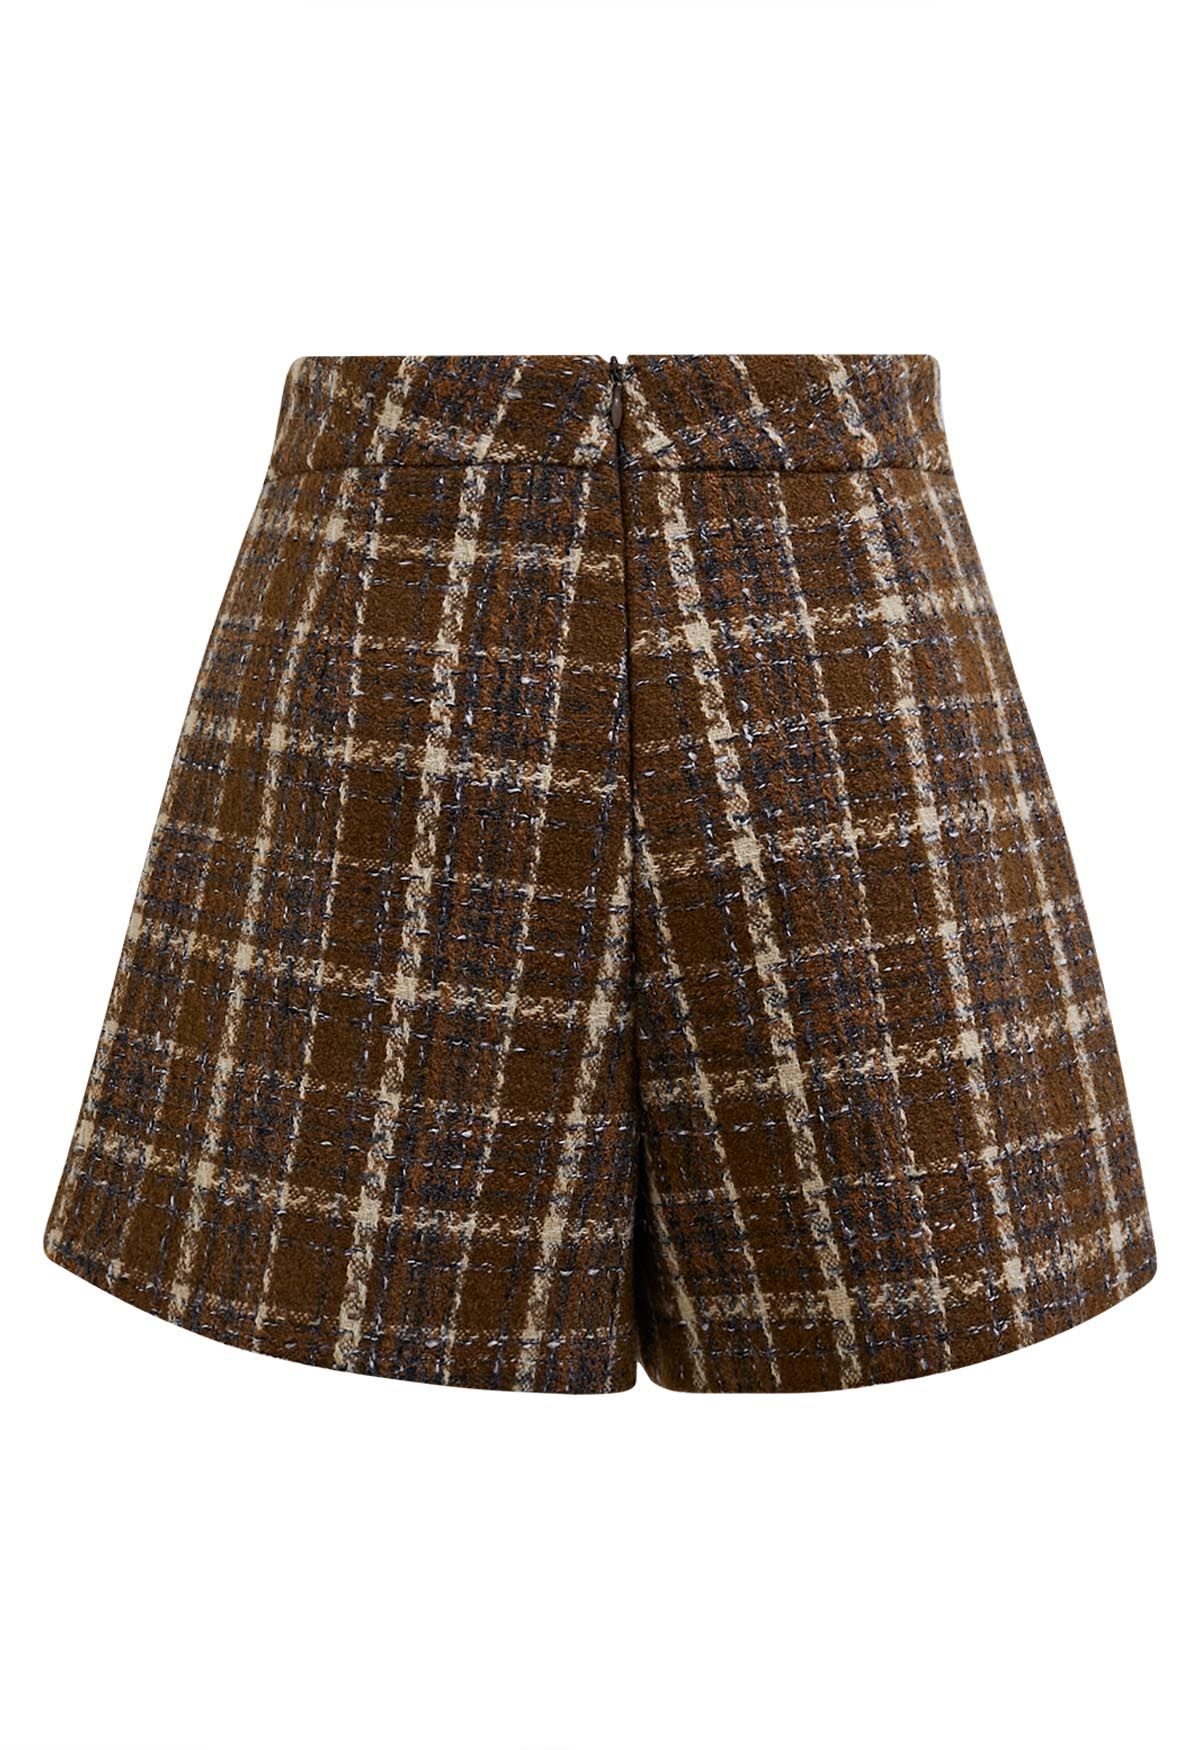 Decorative Buttons Flap Skorts in Brown Tweed - Retro, Indie and Unique ...